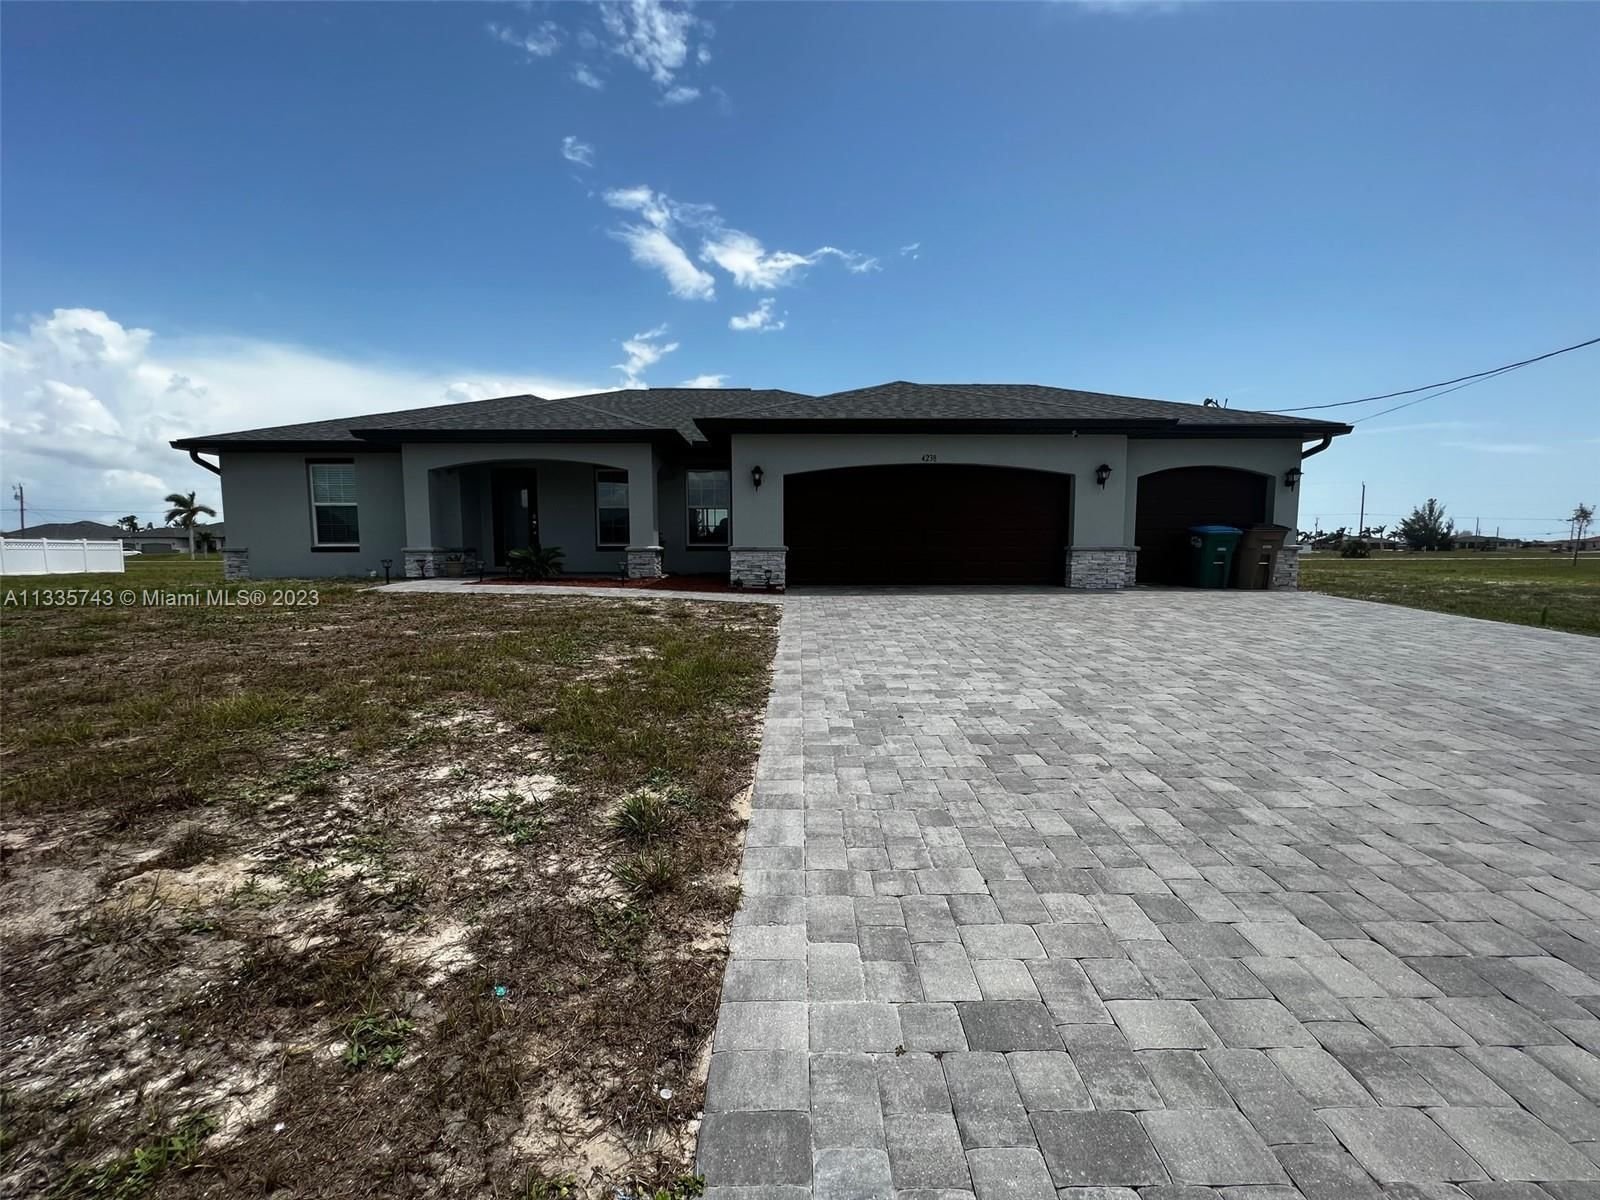 Real estate property located at 4238 34th Lane, Lee County, Cape Coral, FL